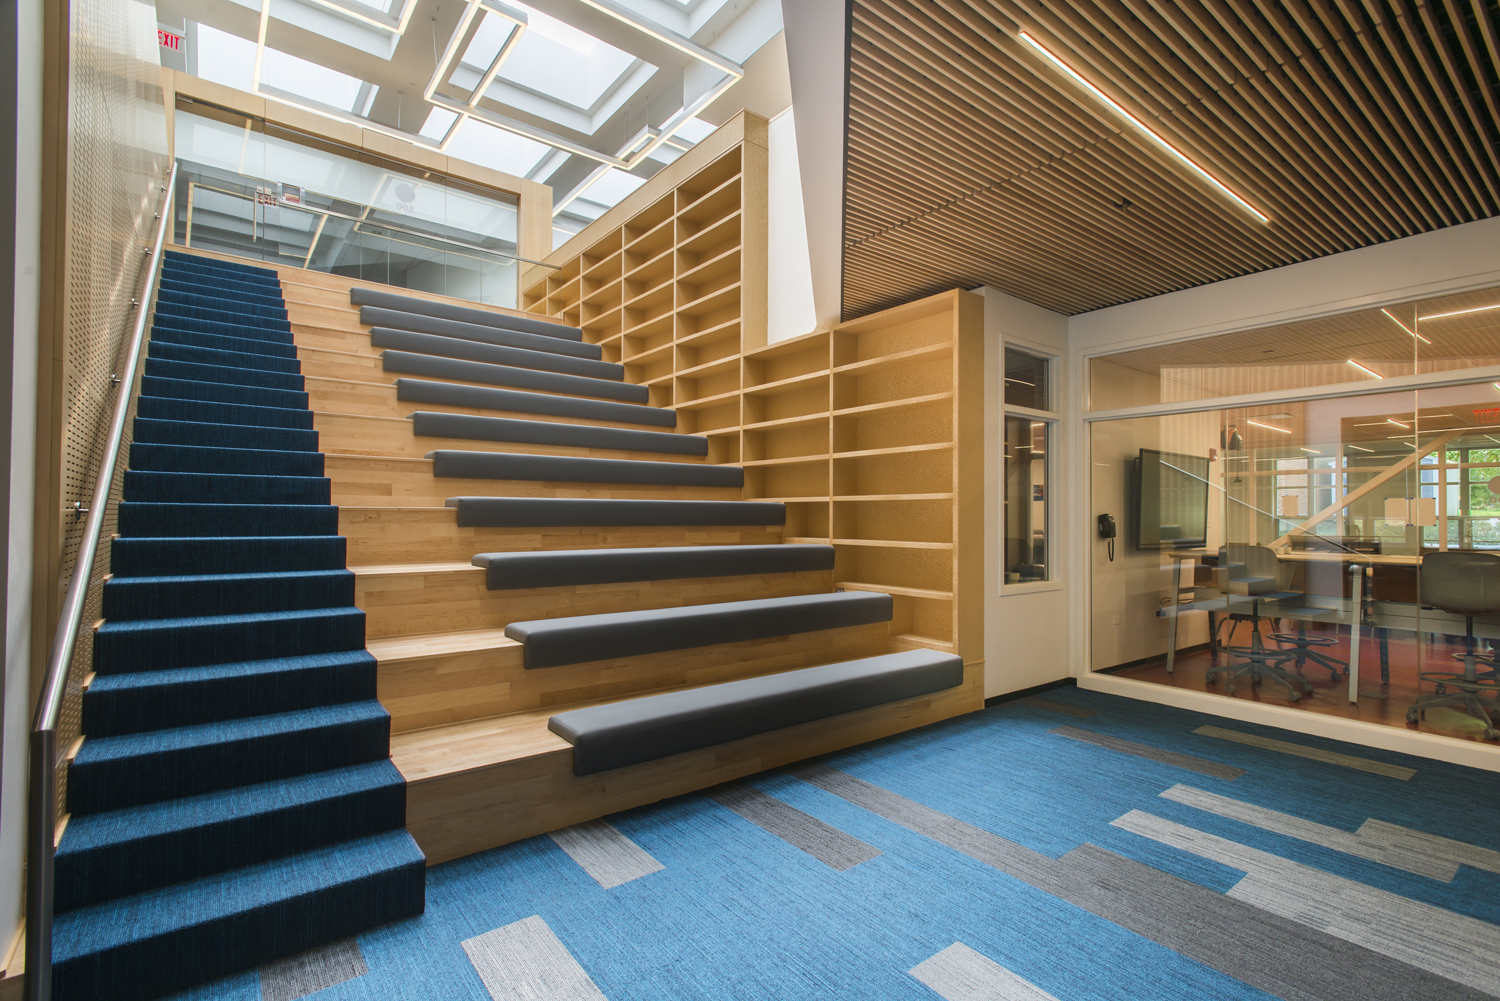 Main staircase and gathering area at NSCD, Library and Science Center.